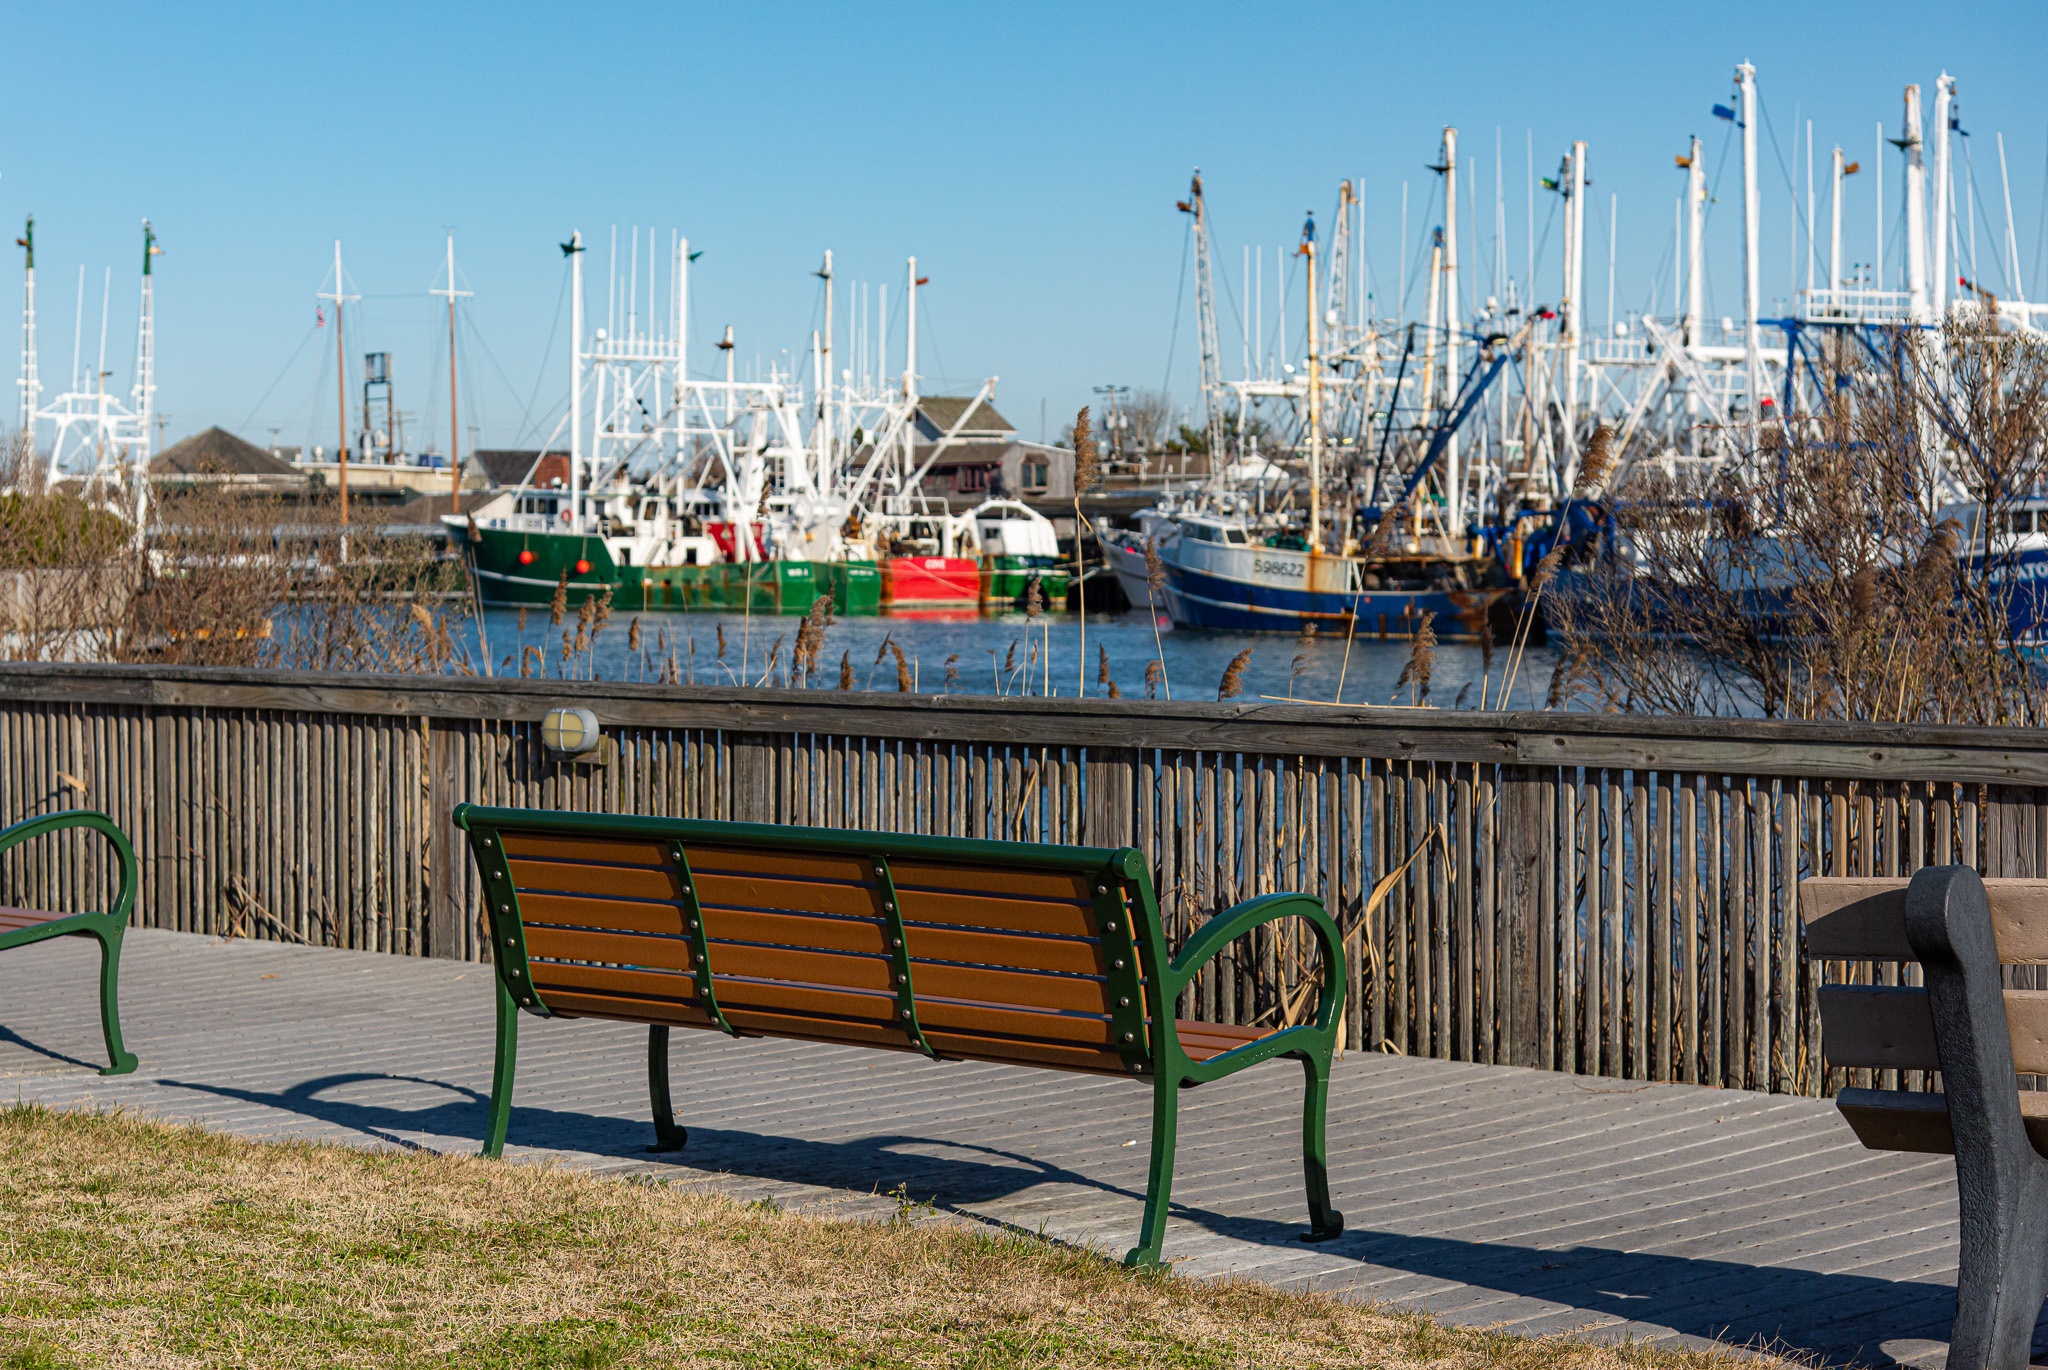 The Harborview Park where benches are to look at the fishing boats at The Lobster House.